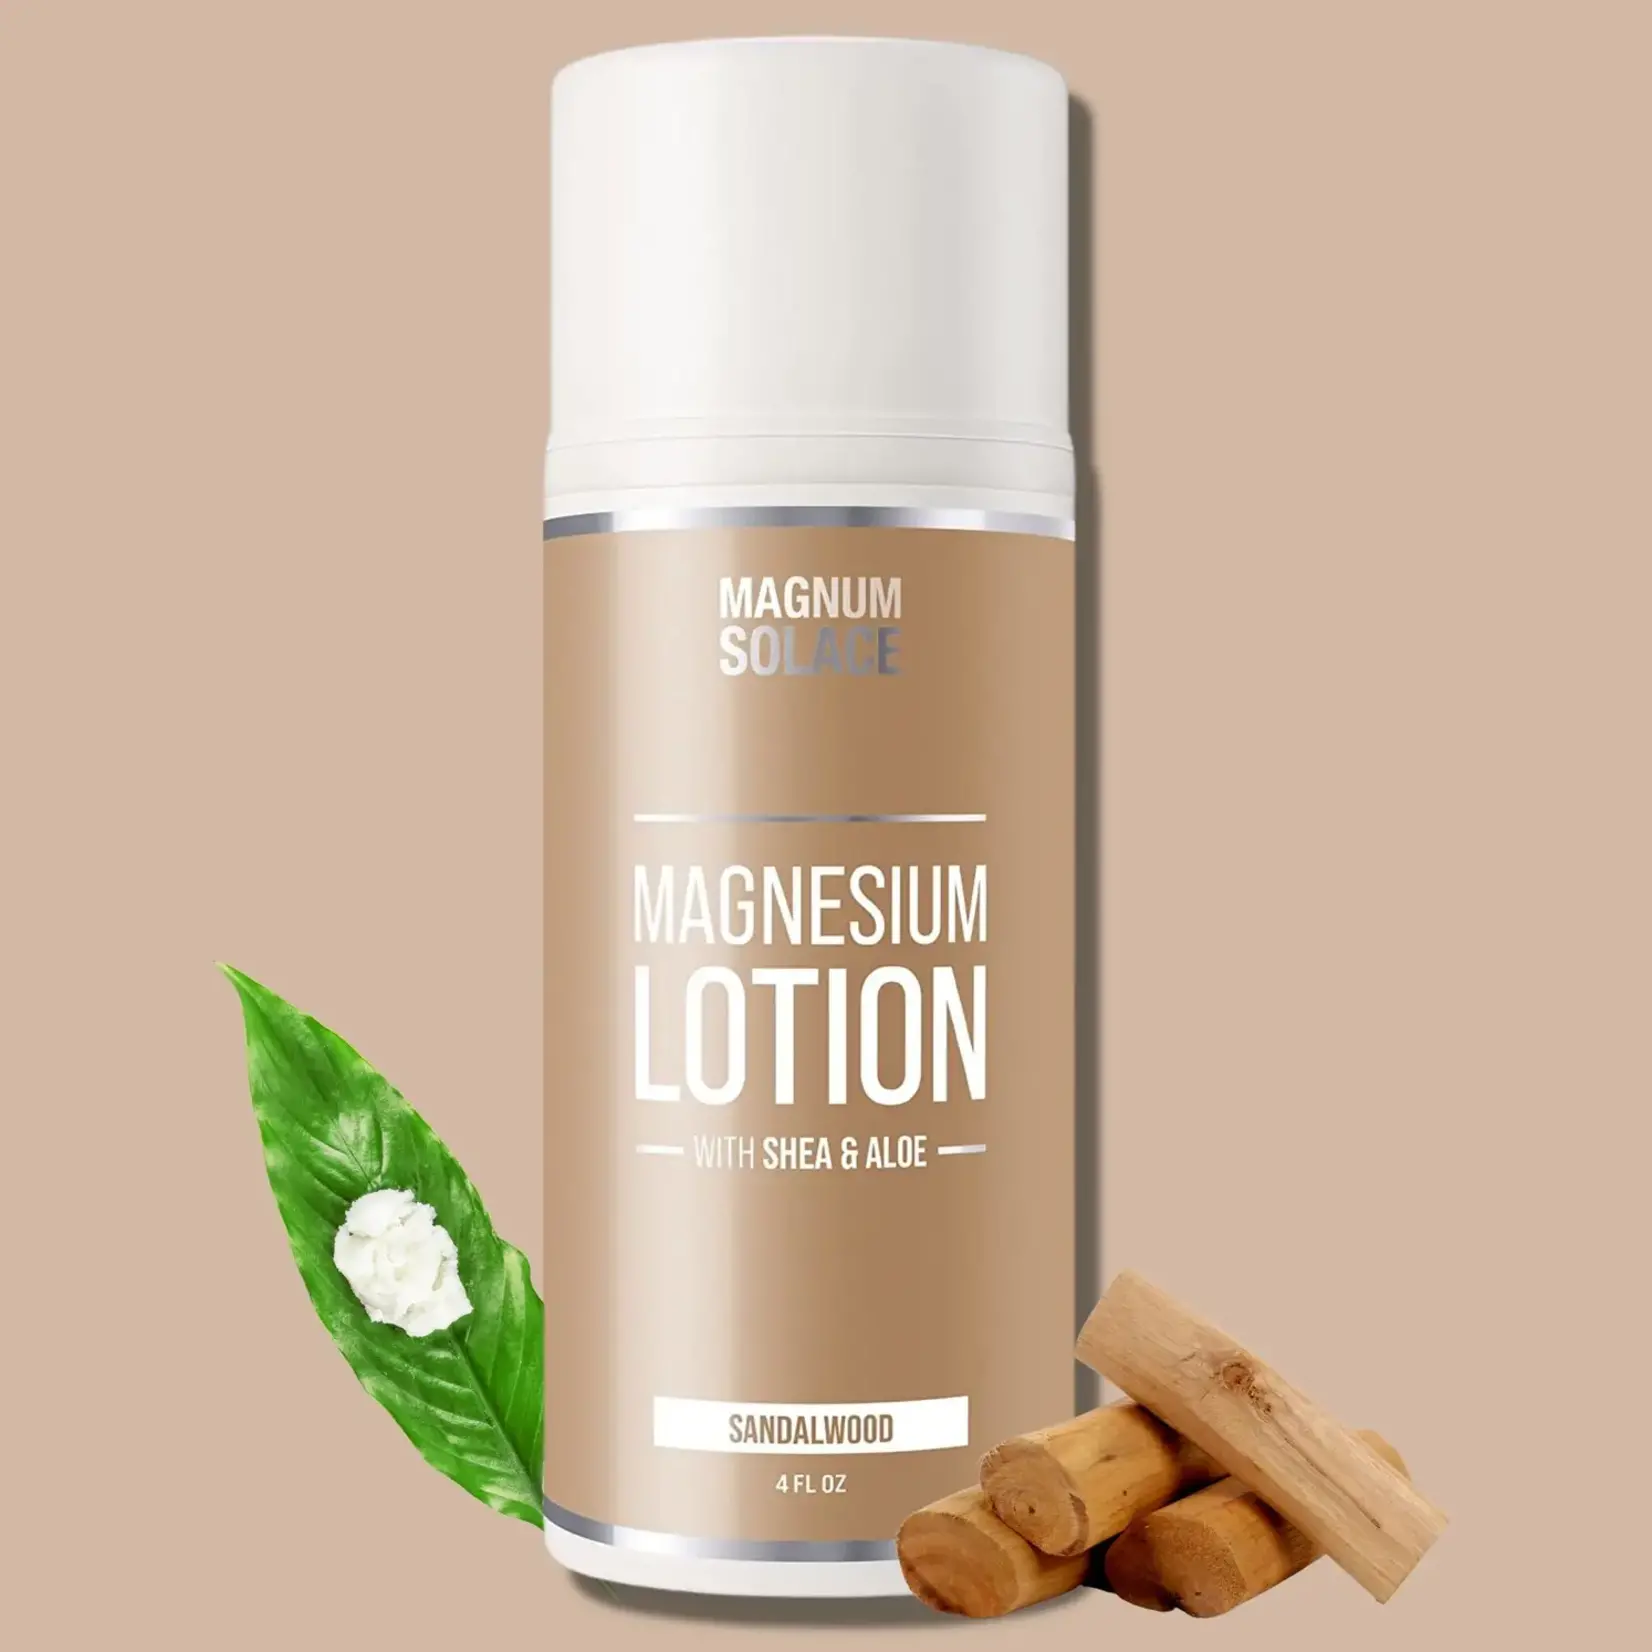 Magnum Solace Magnesium Lotion for Restless Legs & Muscle Pain/Sandalwood